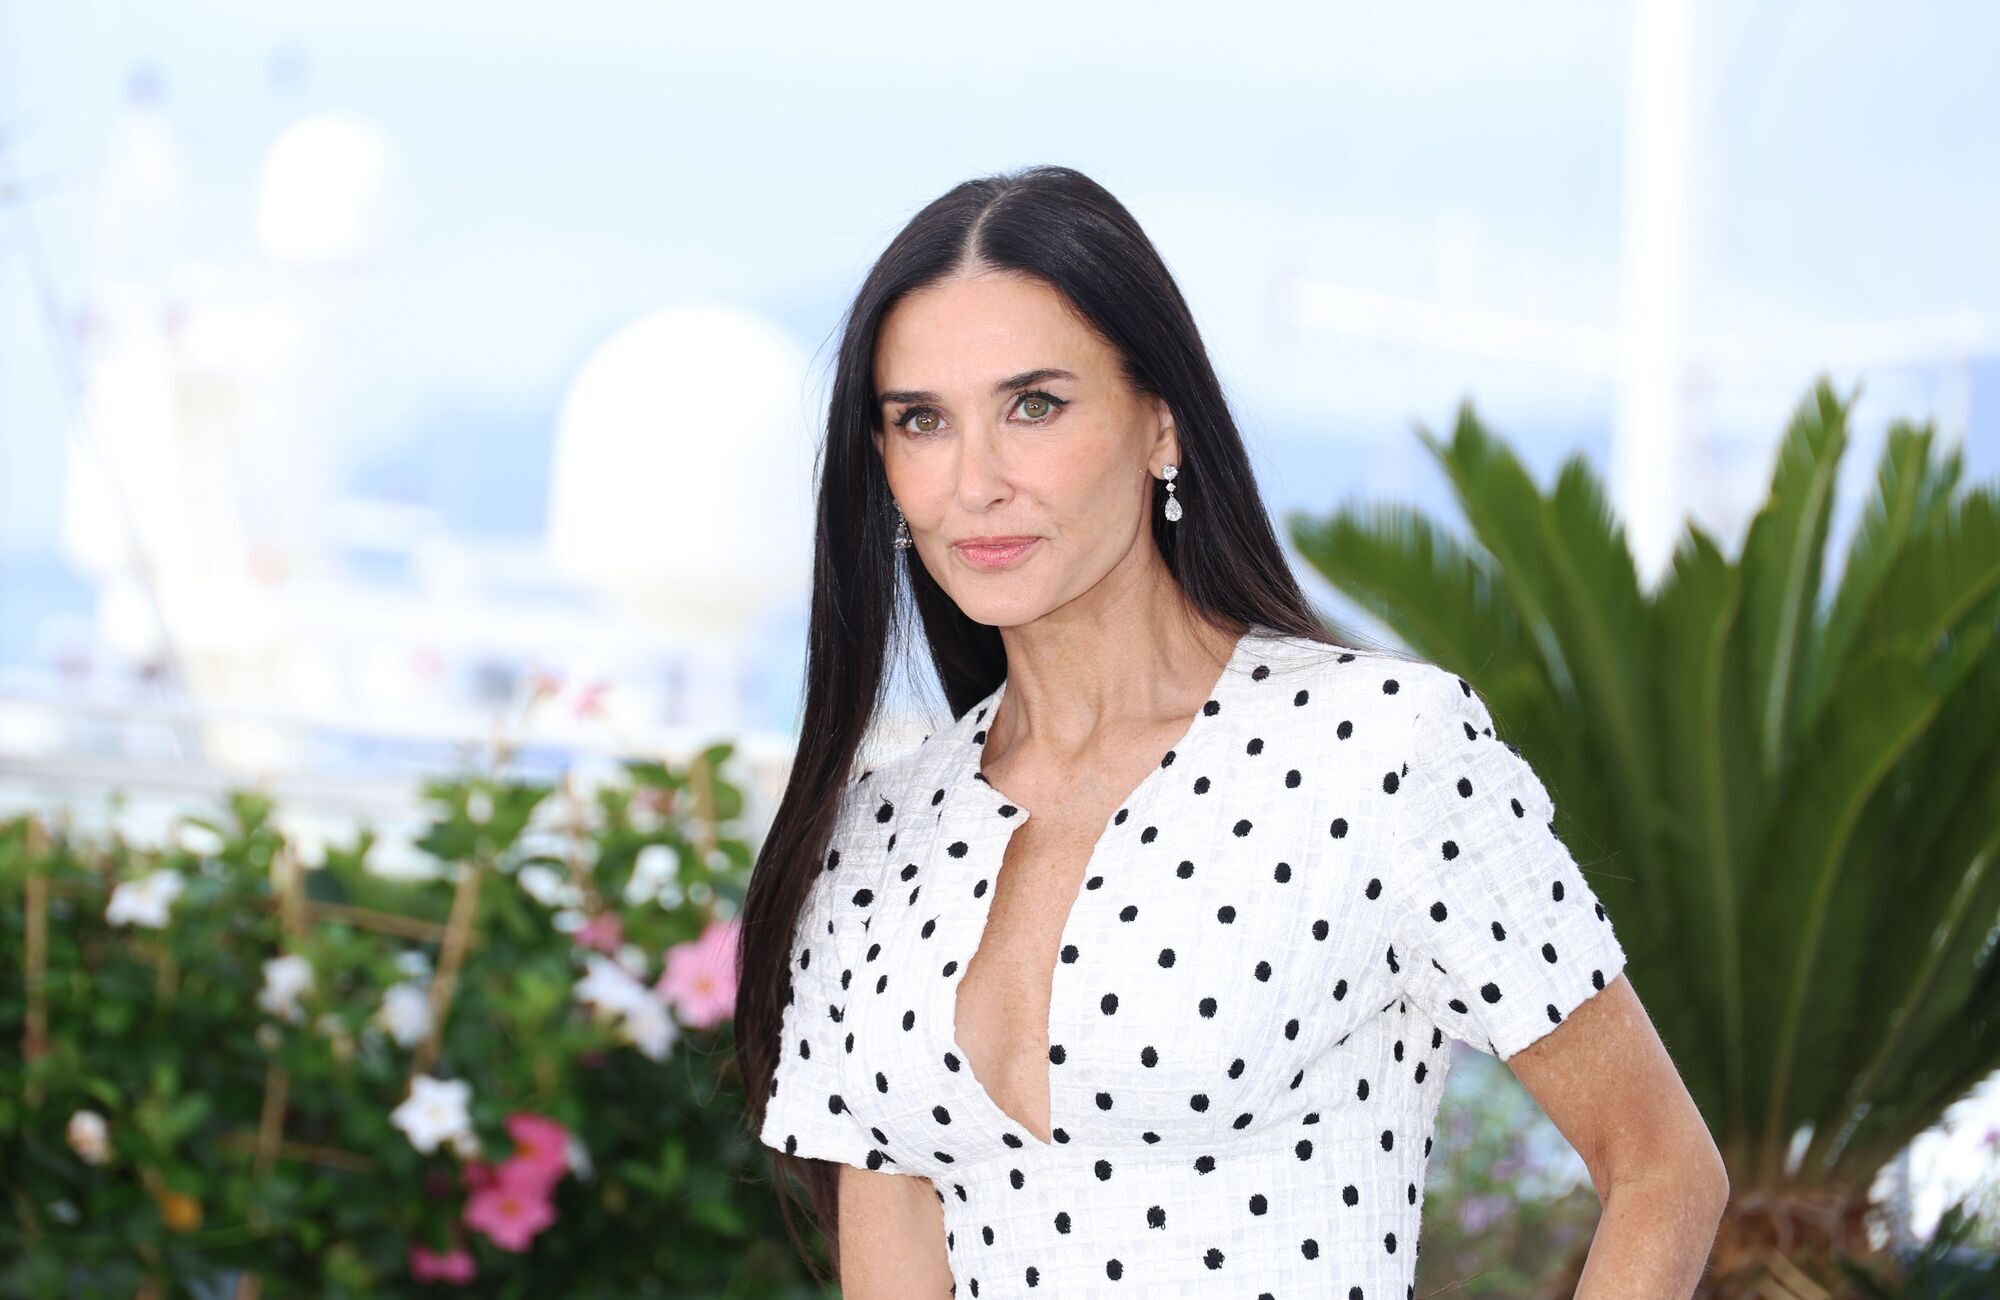 Demi Moore opens up about her childhood traumas.